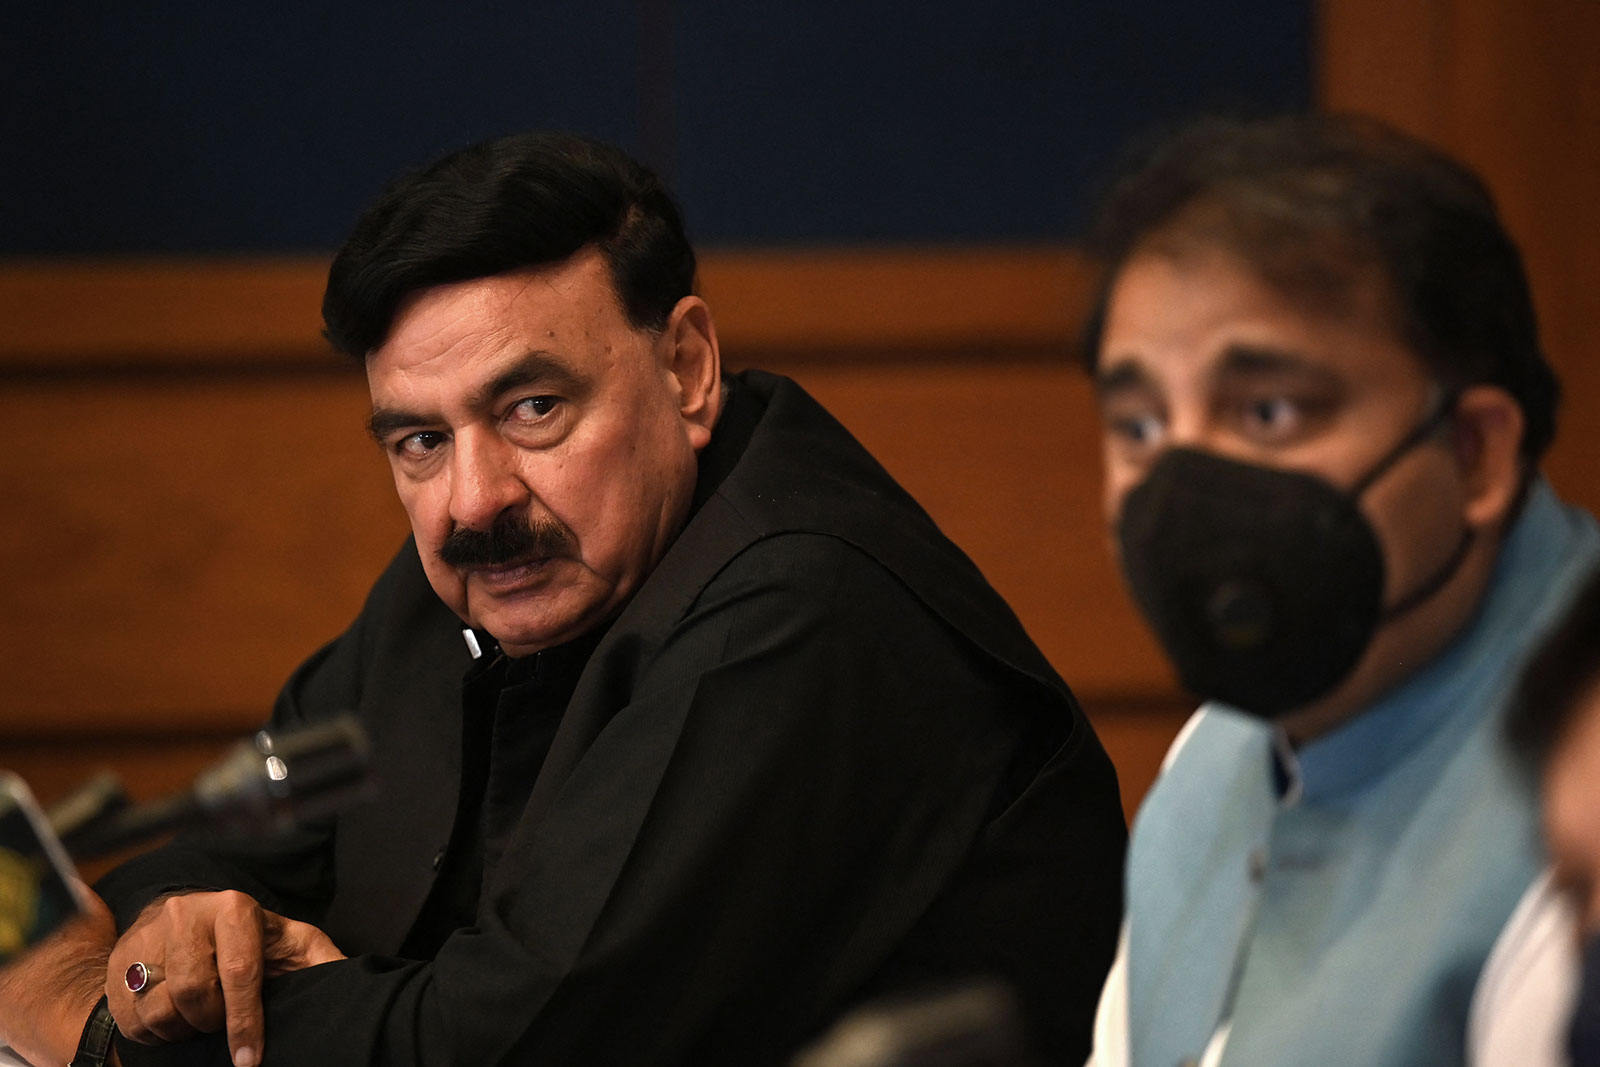 Pakistan’s Interior Minister Sheikh Rashid Ahmed, left, has announced that the government of Pakistan has decided to relax the visa policy for foreign journalists and media workers stranded in Afghanistan.